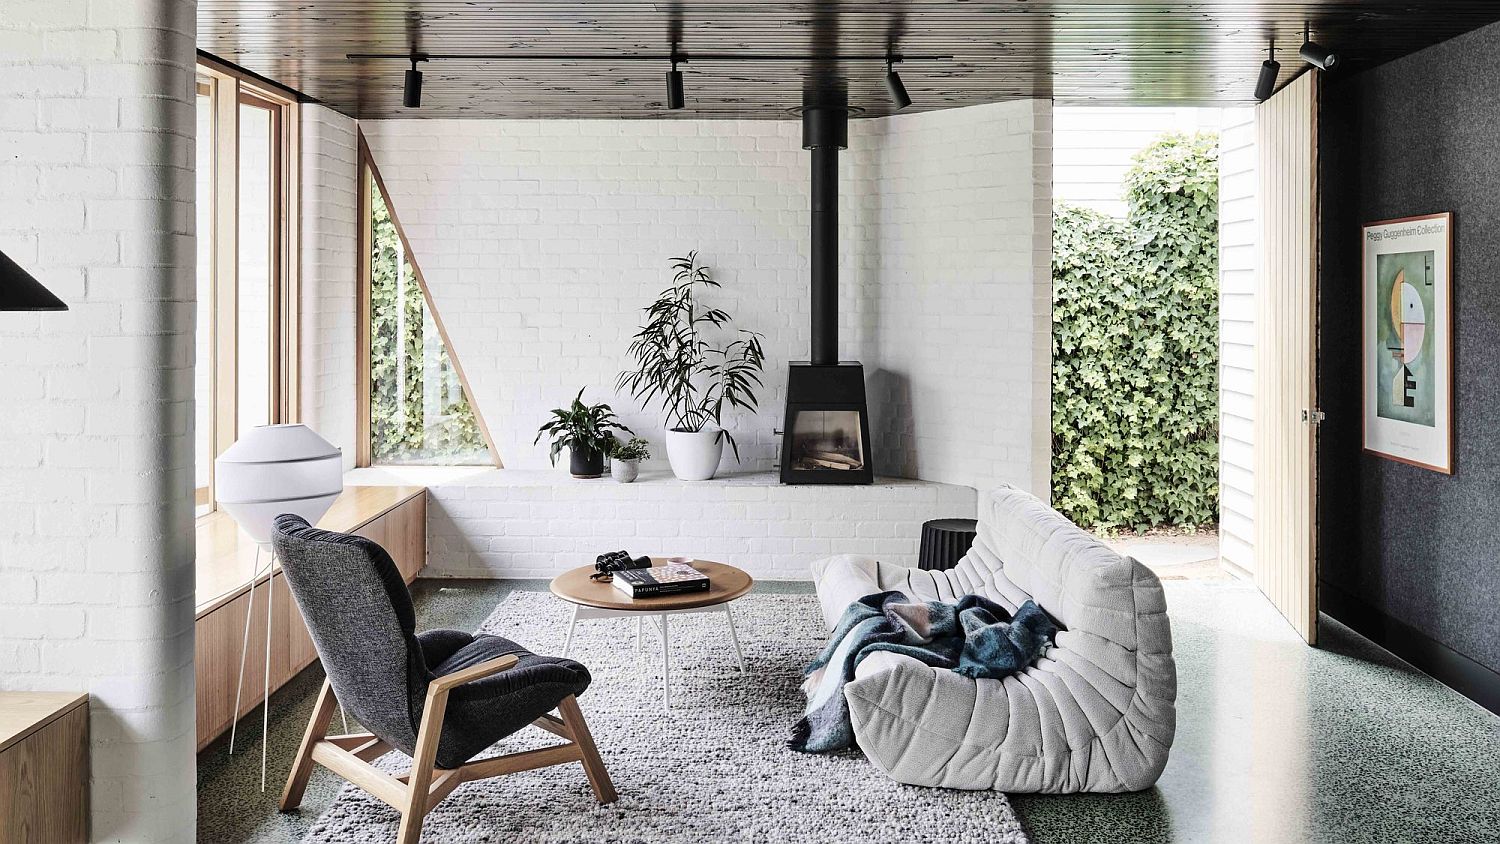 New-living-room-of-the-house-with-brick-walls-and-comfy-nooks